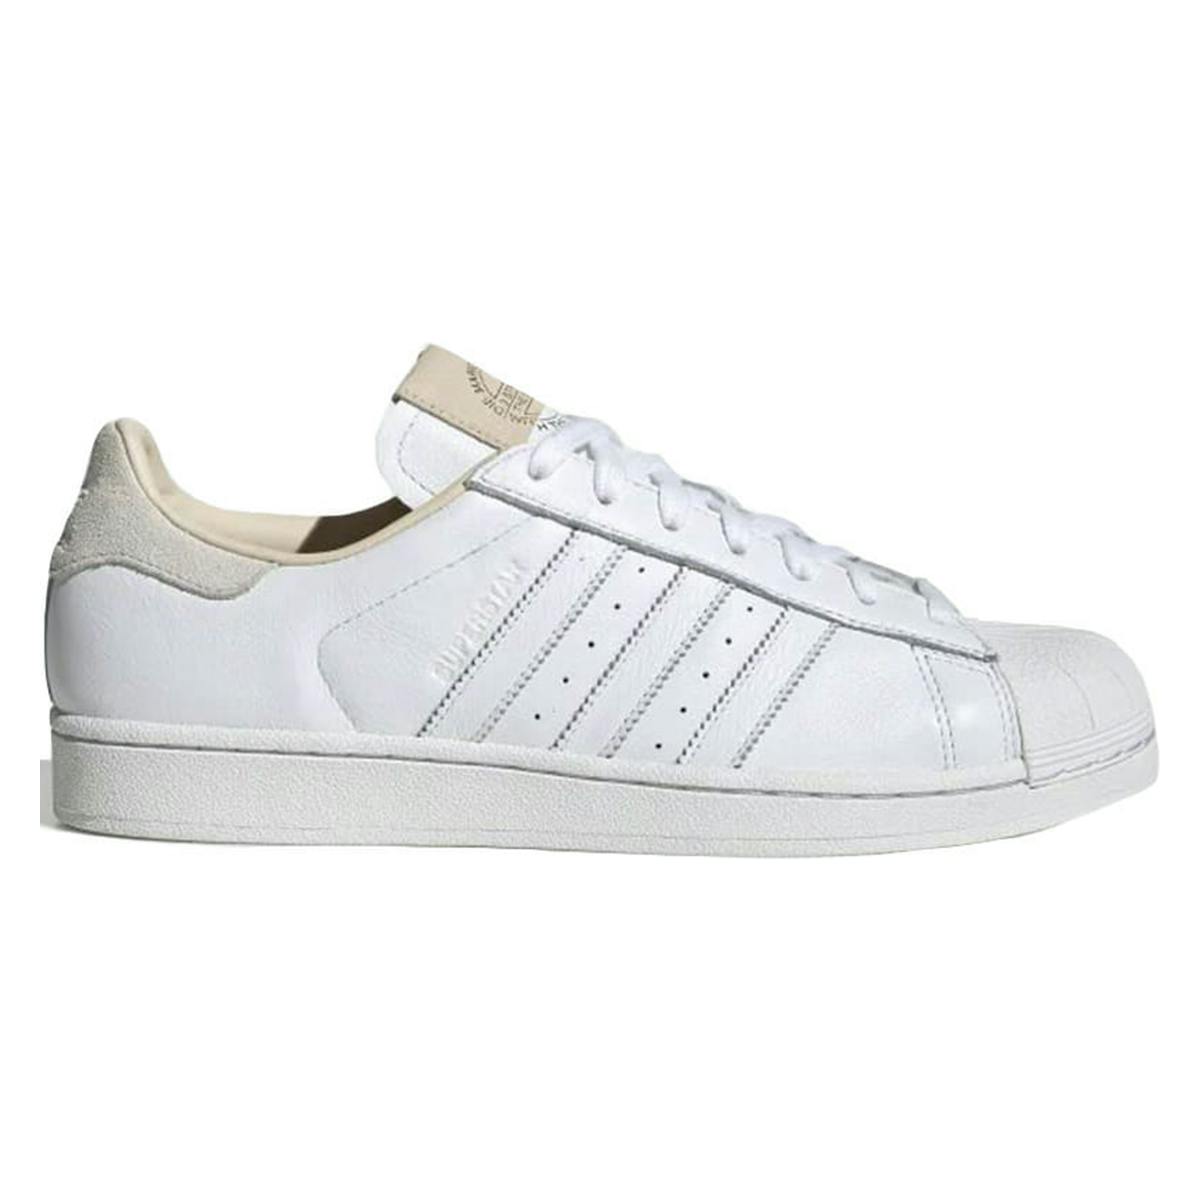 adidas Superstar Home of Classics Pack